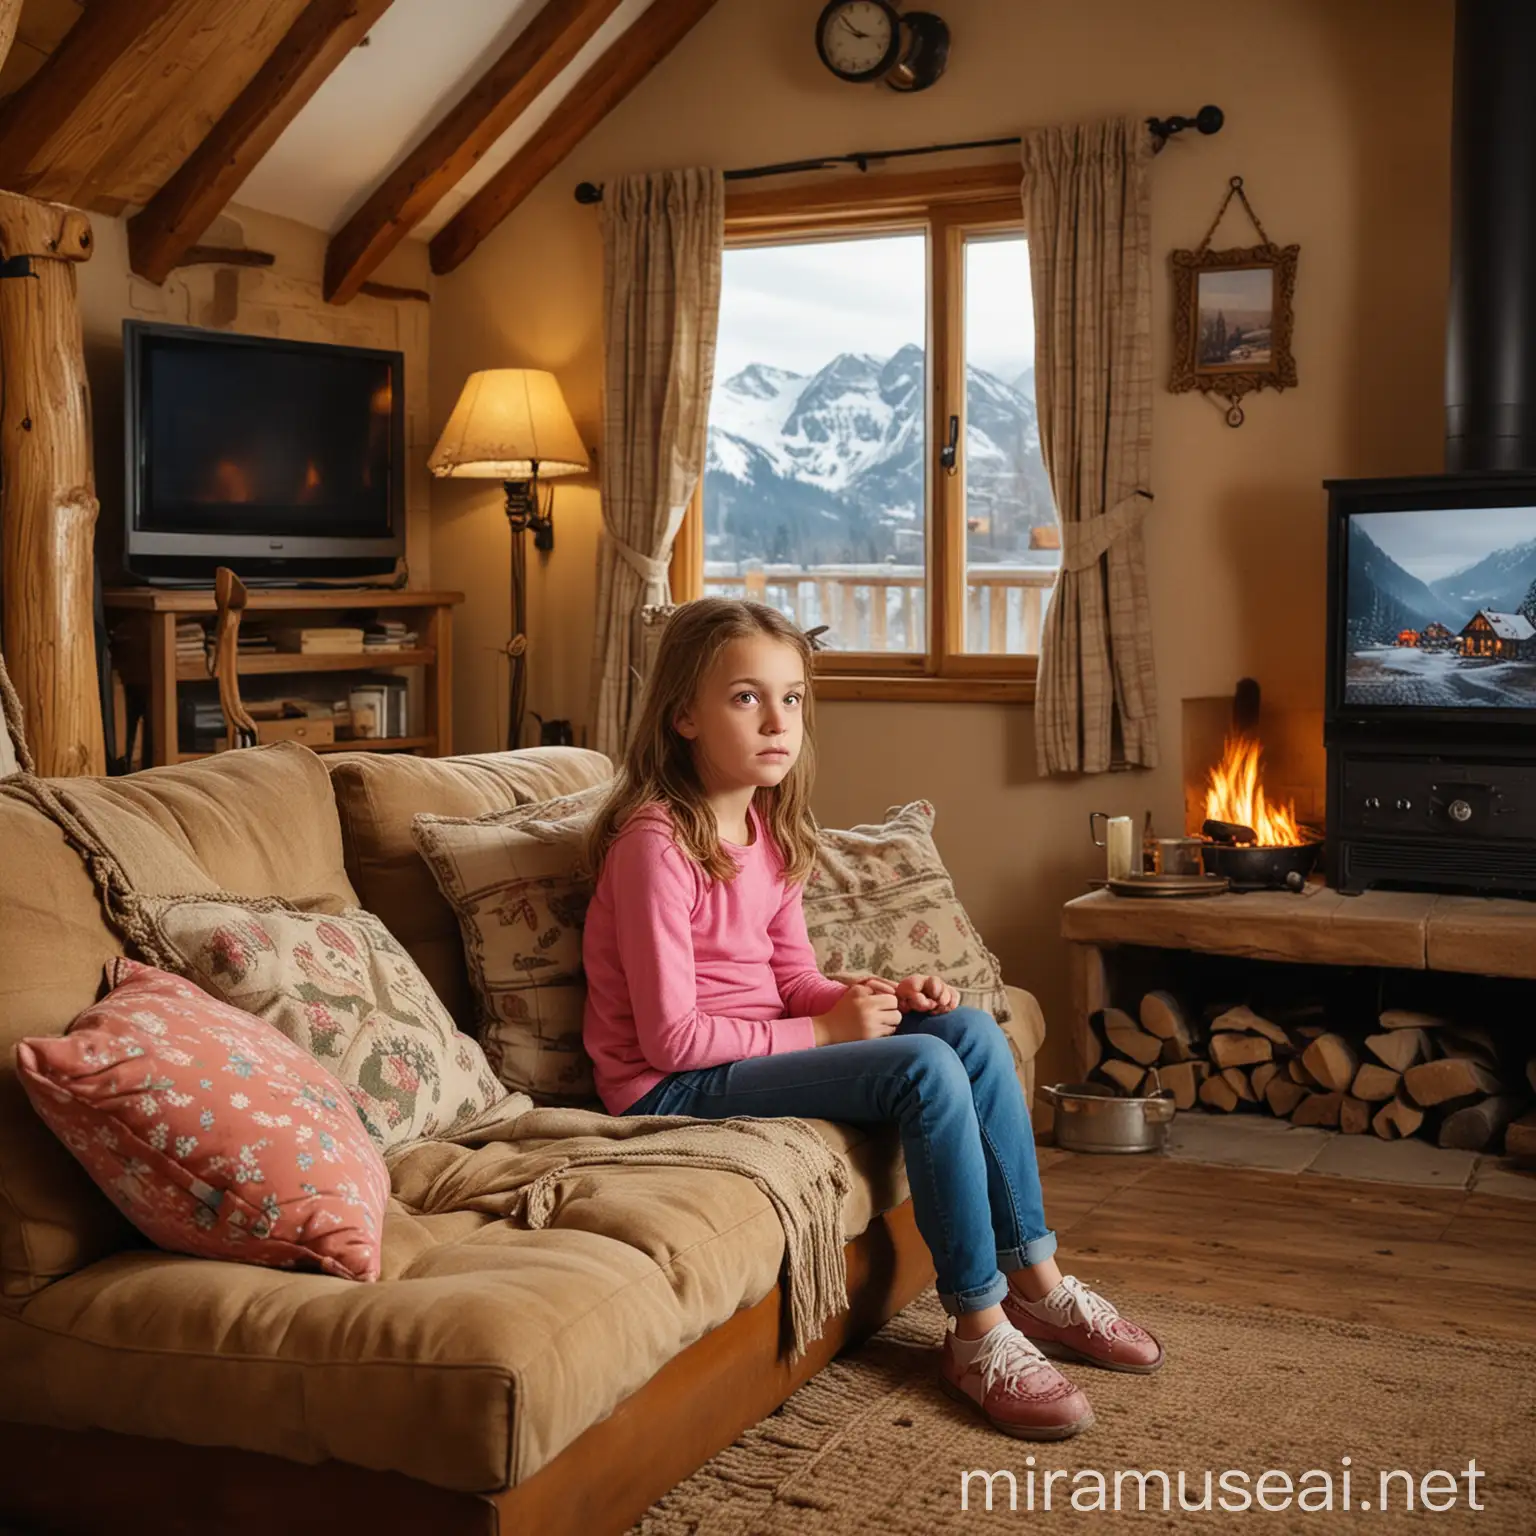 10 year old girl sitting on a sofa with pillows. Set in a cottage living room with a television, fireplace, stove and other mountain-style furnishings. Disturbing Armorosphere